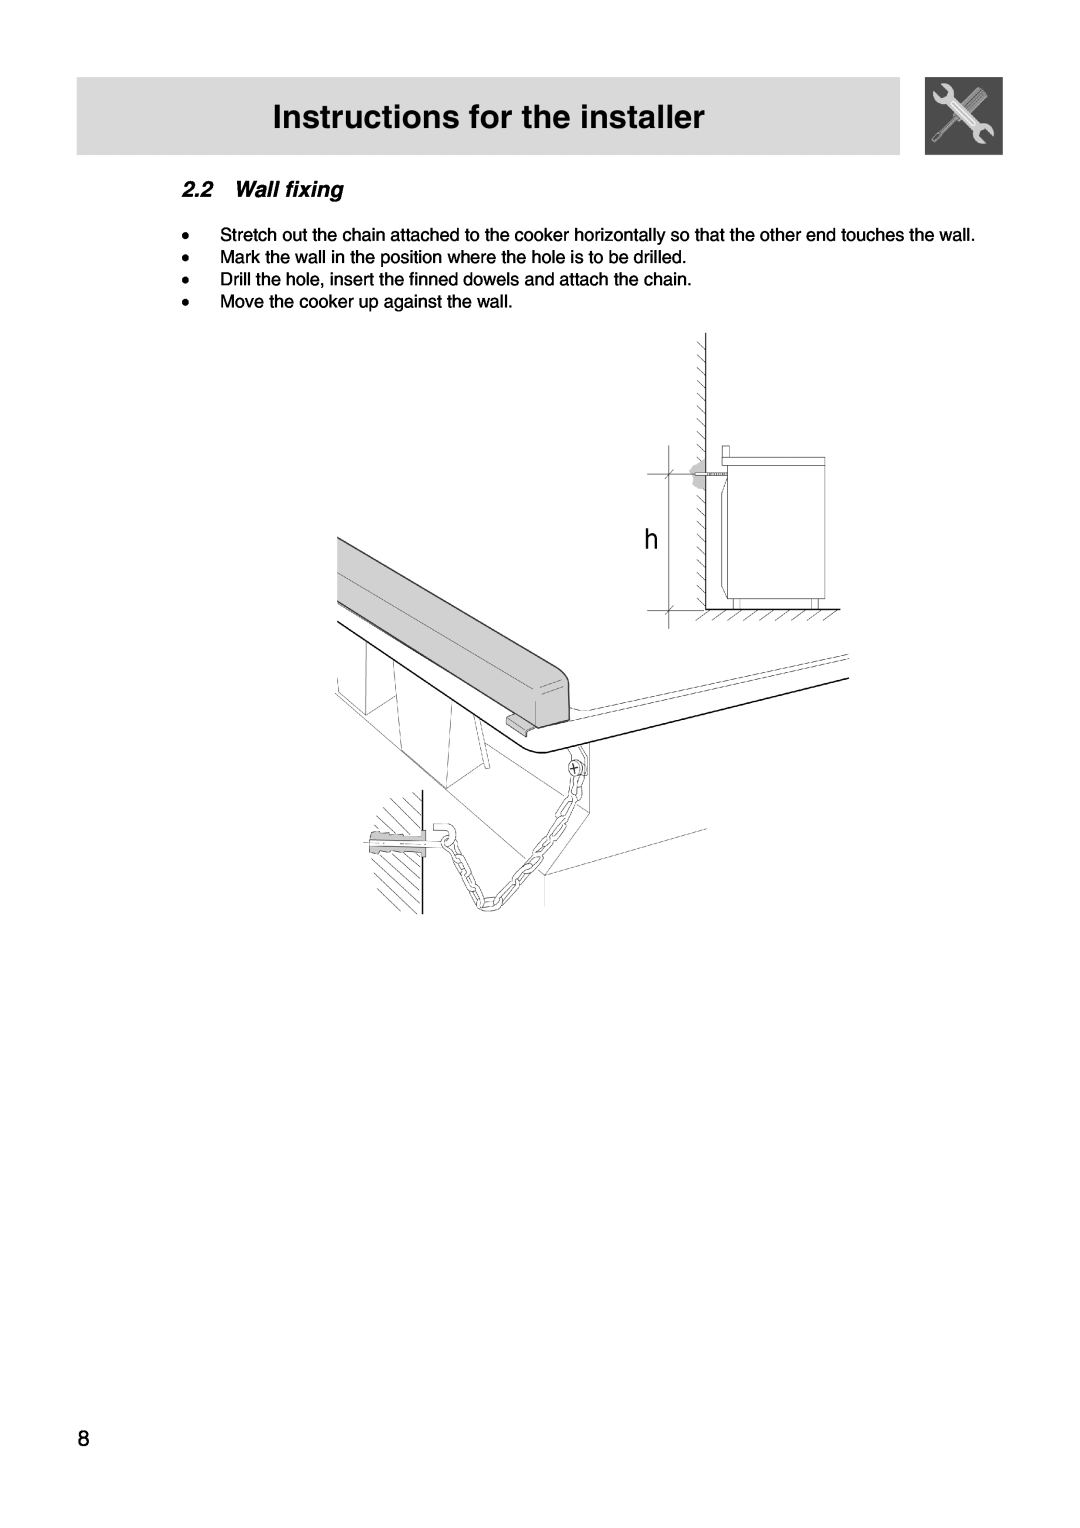 Smeg FS66MFX Wall fixing, Instructions for the installer, Mark the wall in the position where the hole is to be drilled 